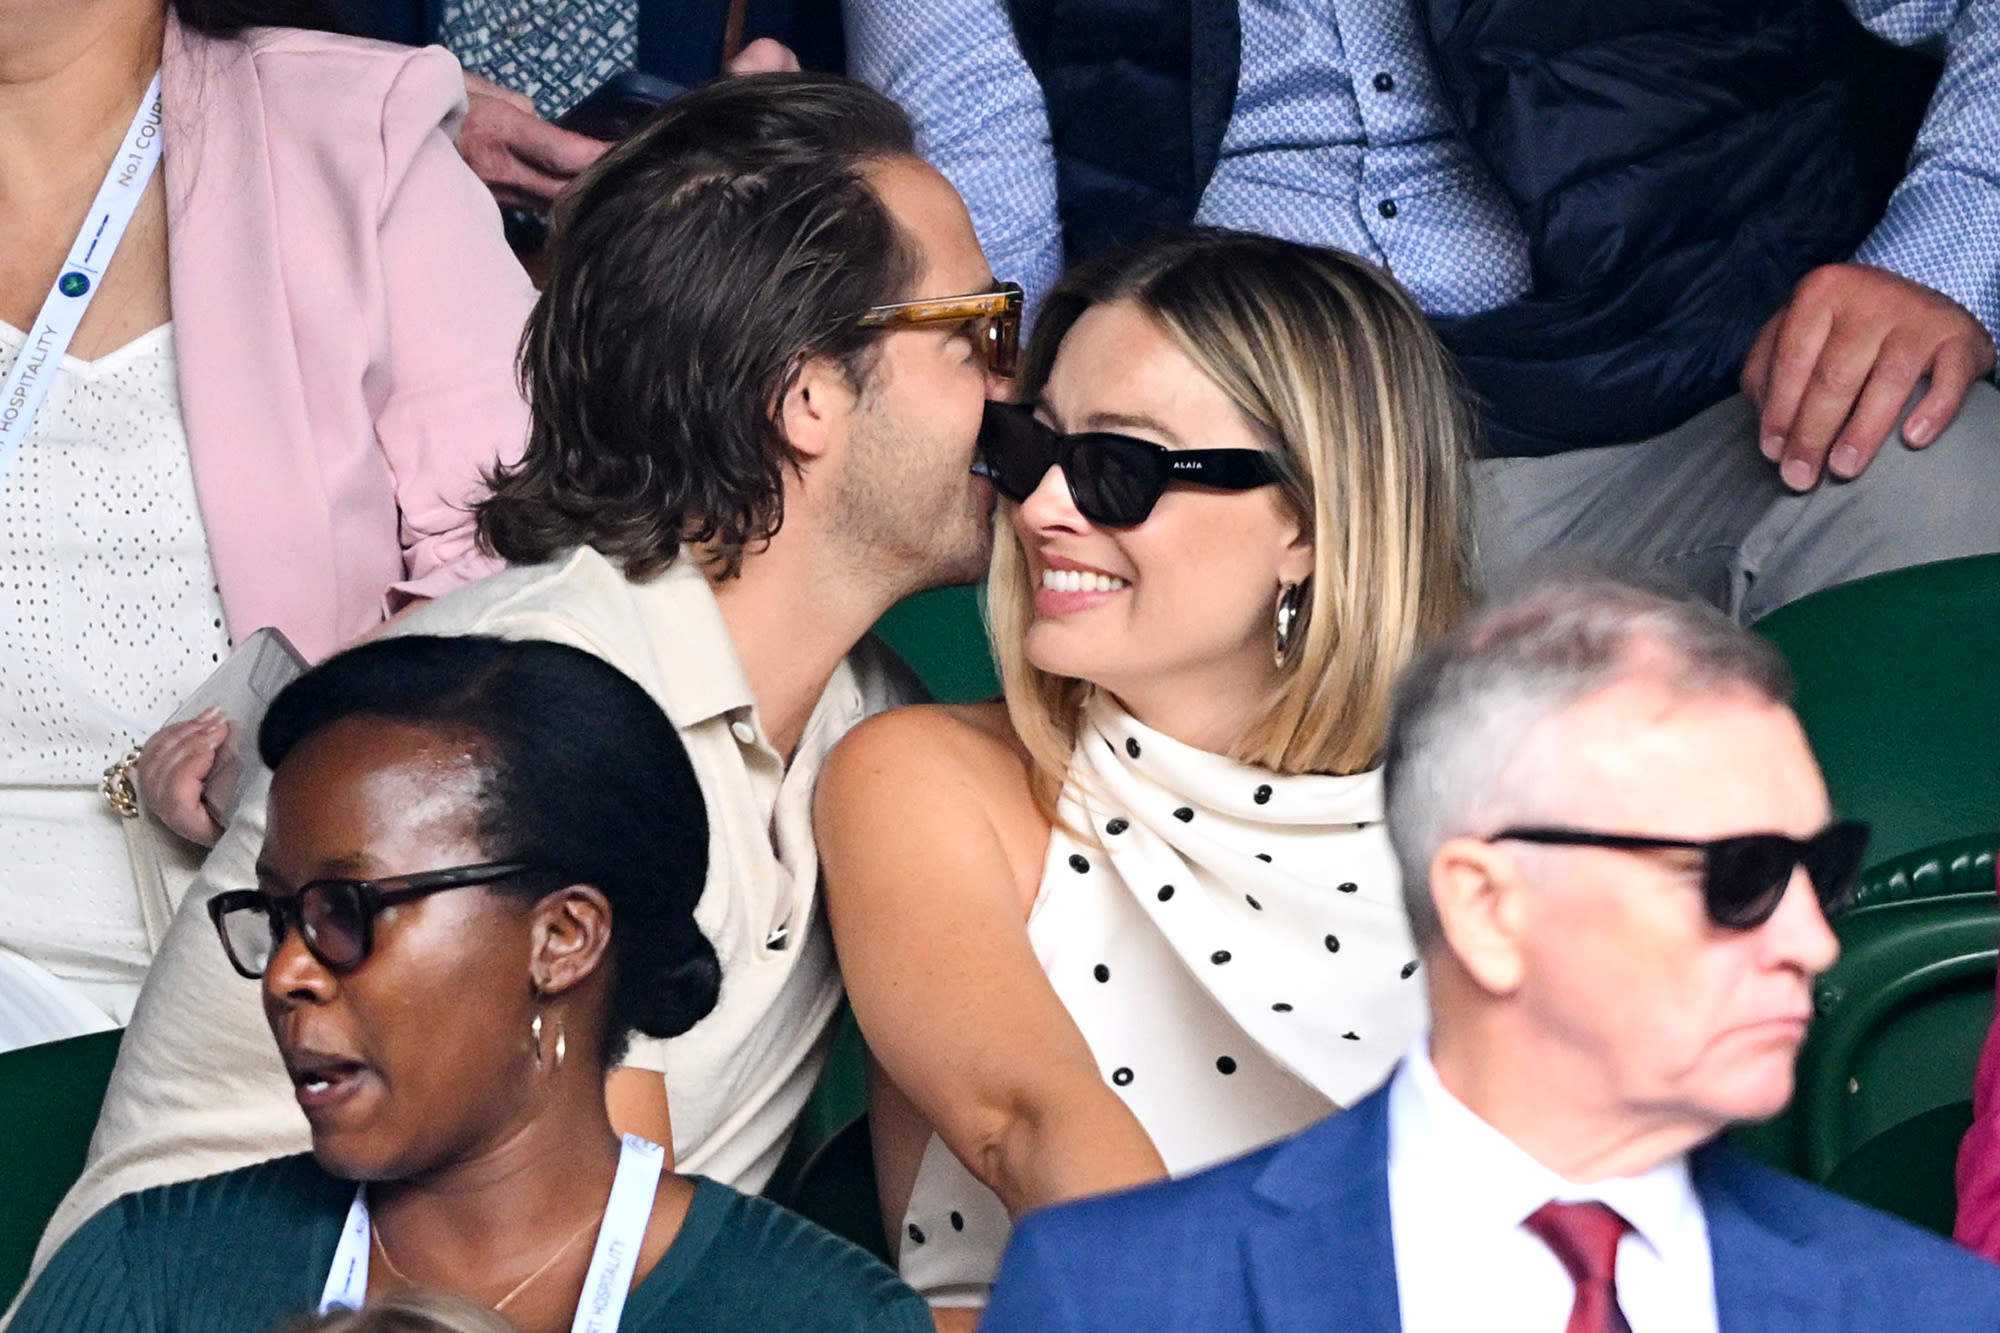 Pregnant Margot Robbie Glows at Wimbledon While Packing on the PDA With Husband Tom Ackerley